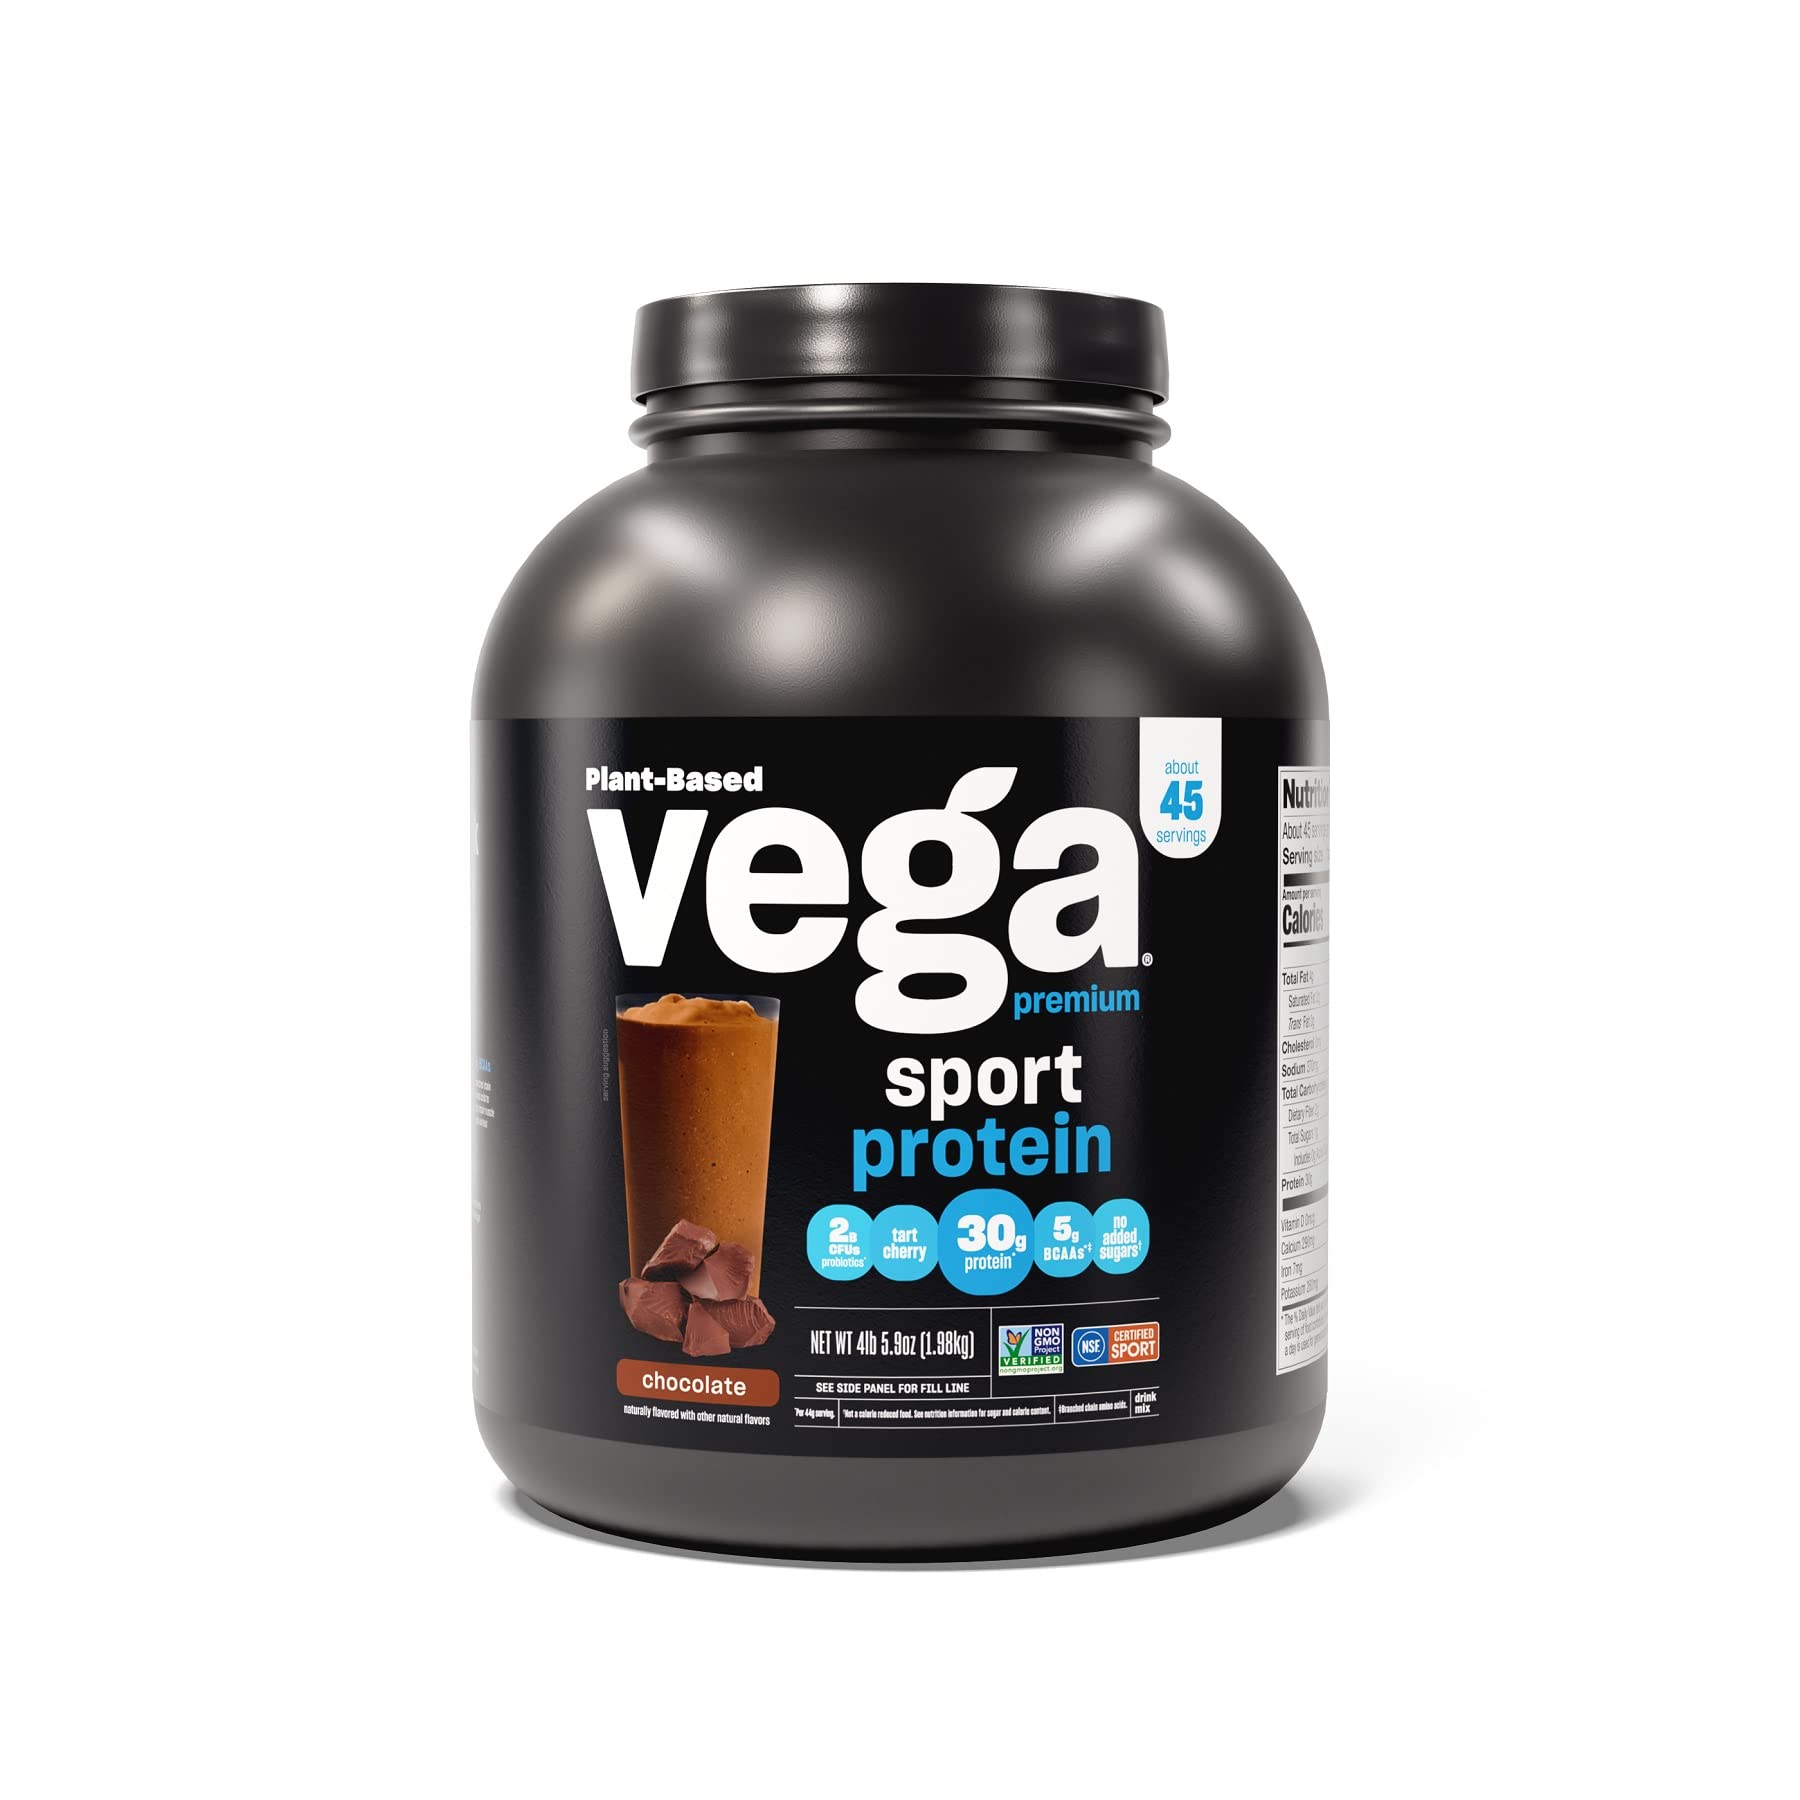 Vega Sport Premium Vegan Protein Powder, Chocolate - 30g Plant Based Protein, 5g BCAAs, Low Carb, Keto, Dairy Free, Gluten Free, Non GMO, Pea Protein for Women & Men, 4 lbs (Packaging May Vary)